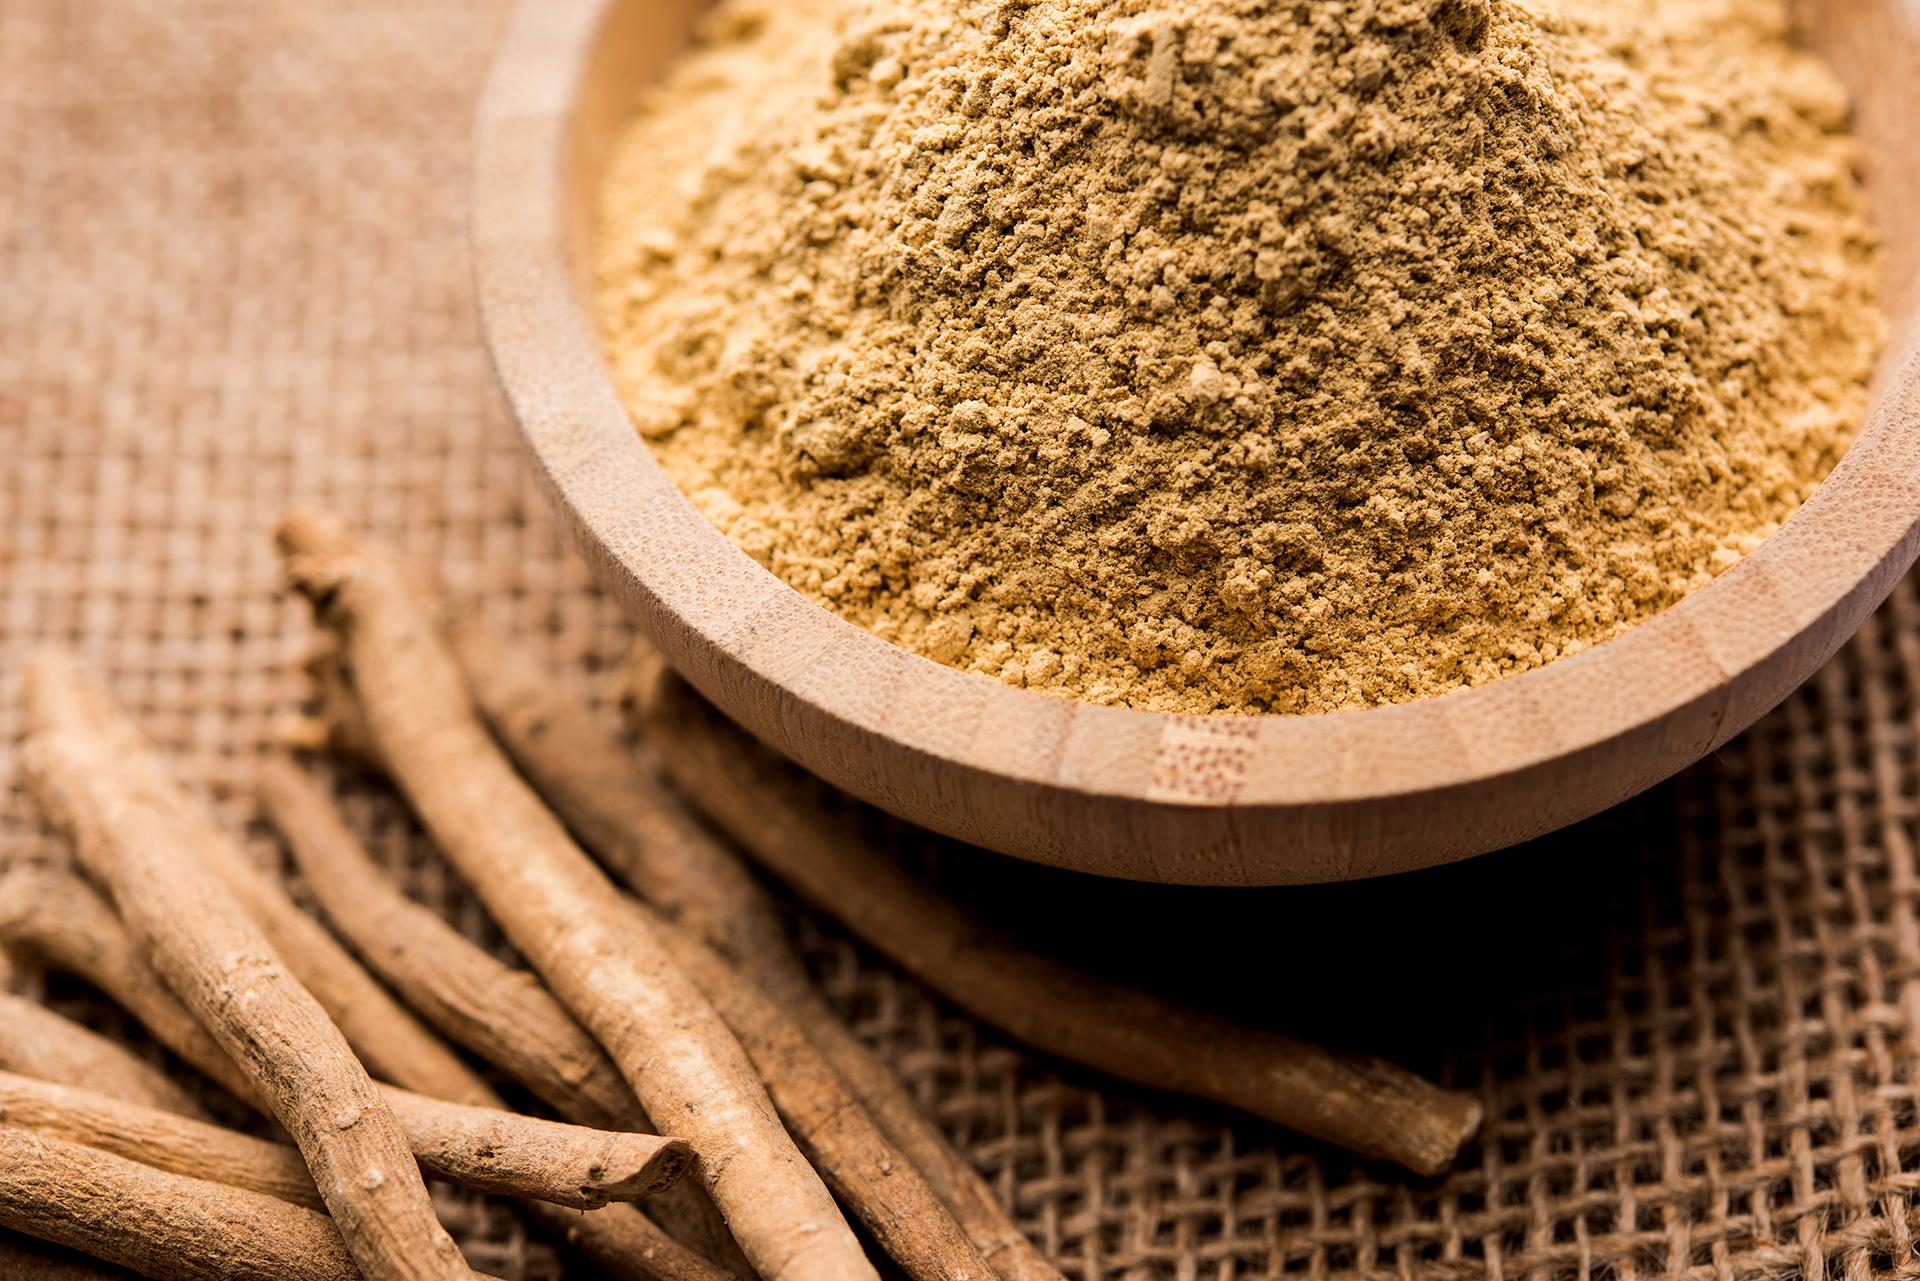 Importance of Ashwagandha: When is the Best Time to Take This Herb?